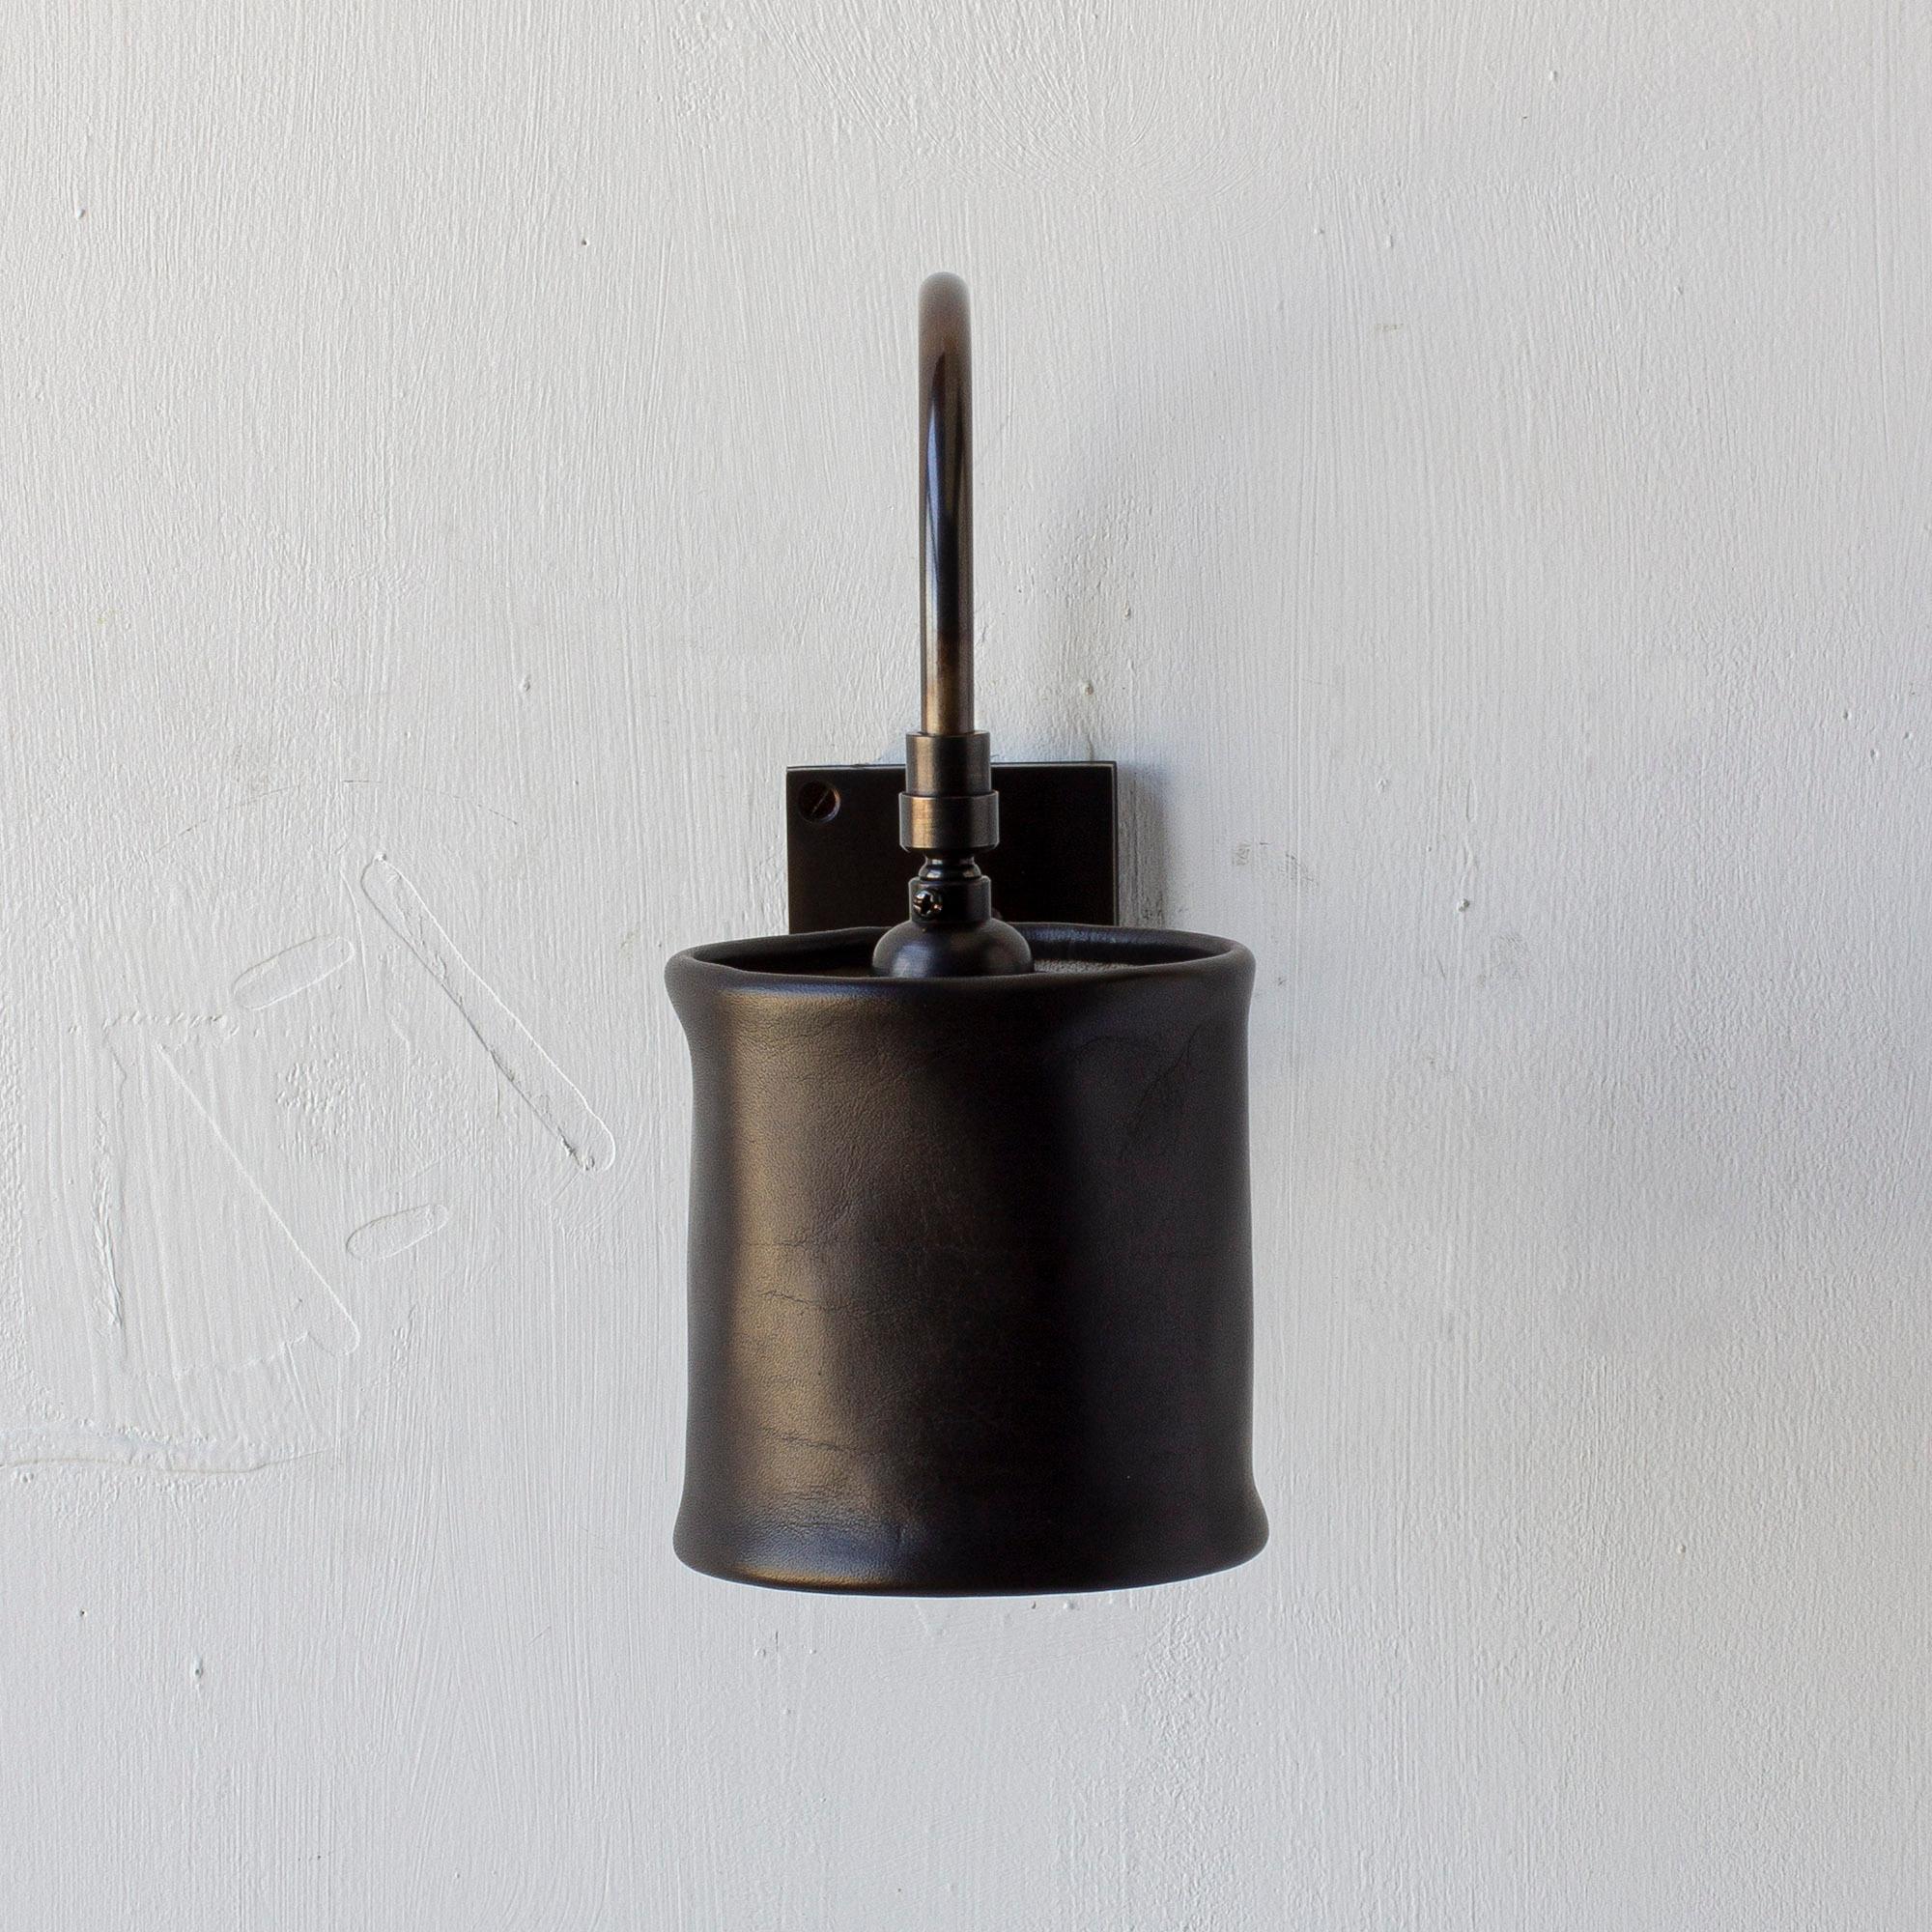 Solid machined brass in dark patinated finish, hand-dyed soft unstructured leather pivoting shade. All material finishes are living finishes: they will change and patina for the better with time and use. Backplate is made to fit only a single gang